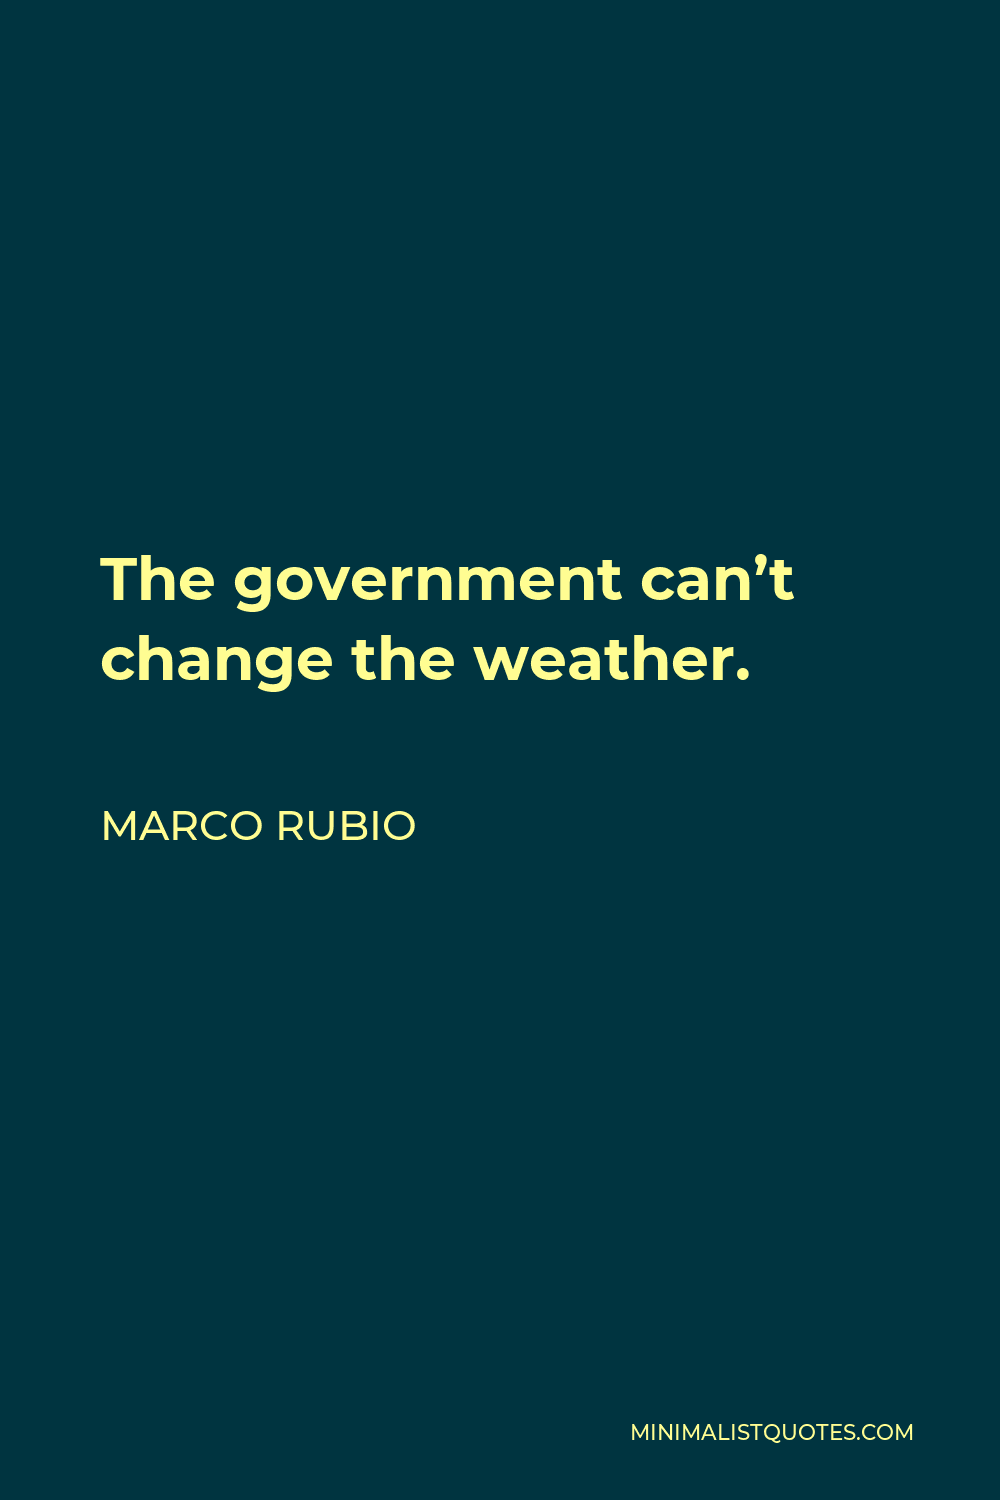 Marco Rubio Quote - The government can’t change the weather.